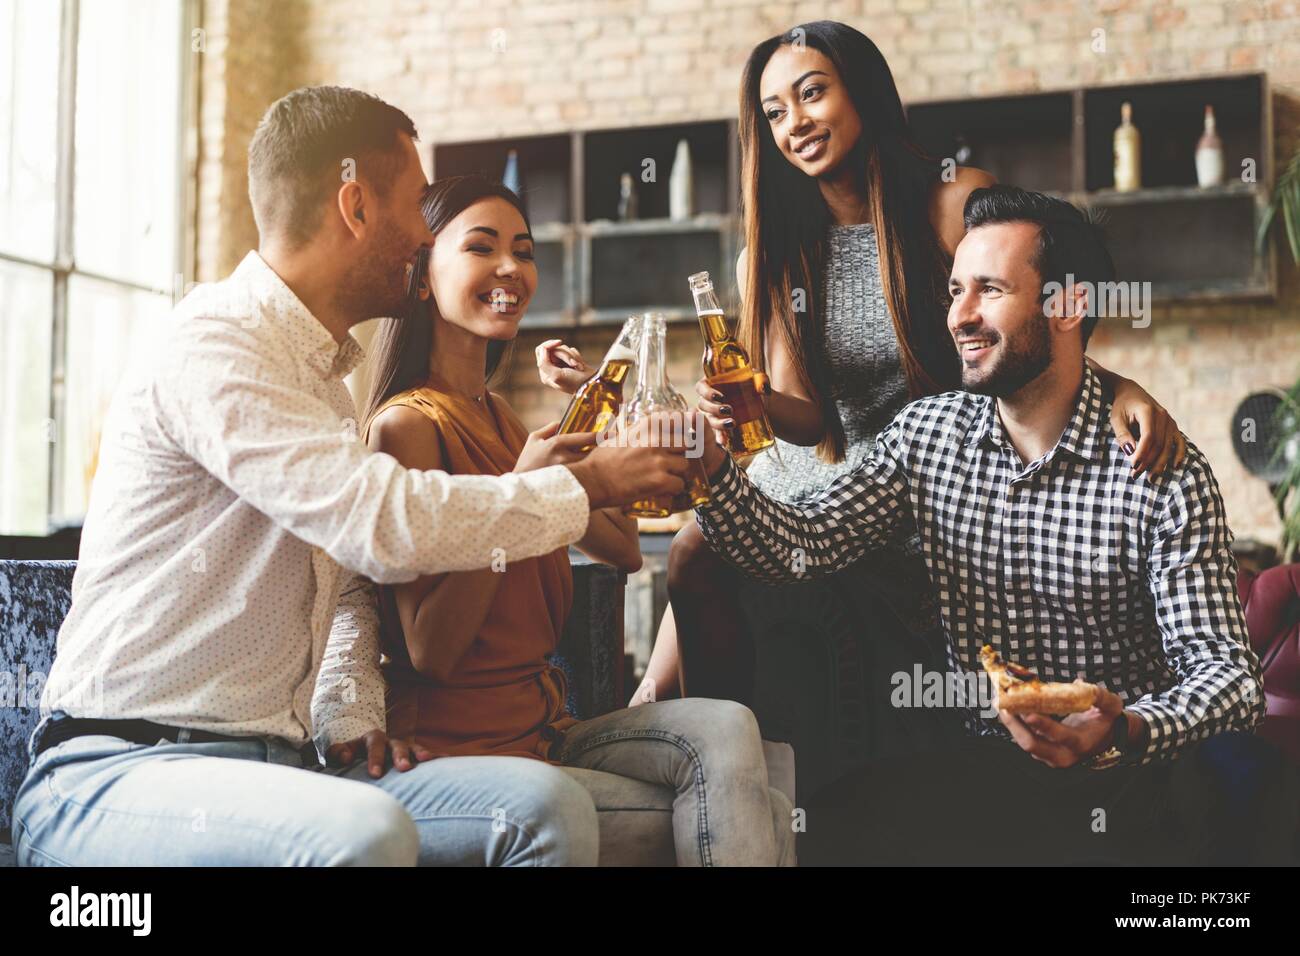 Spending great time with best friends. Group of cheerful young people enjoying food and drinks while spending nice time in cofortable chairs on the kitchen together. Stock Photo